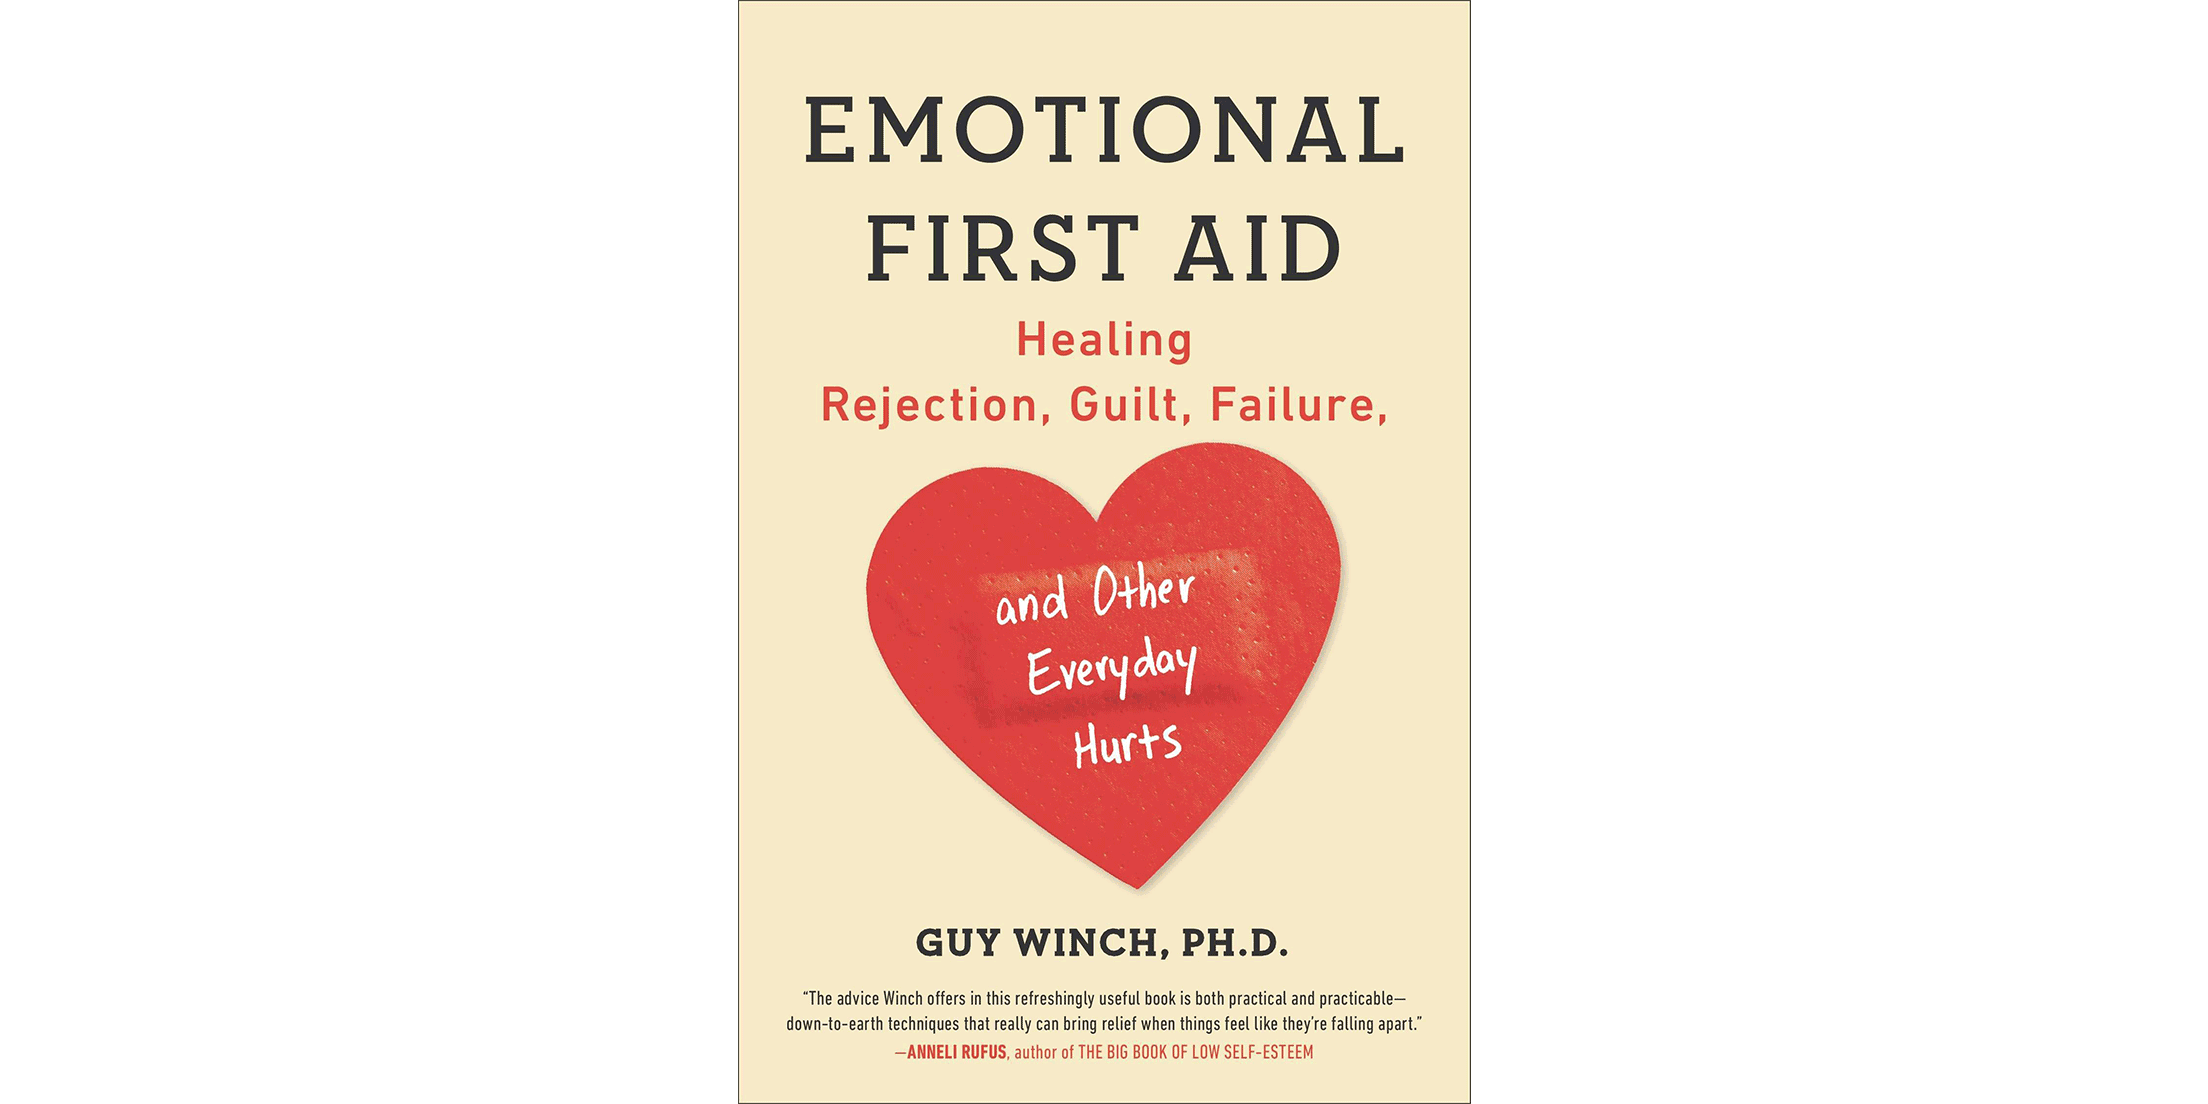 Doist Reading List Emotional First Aid: Healing Rejection, Guilt, Failure, and Other Everyday Hurts - Guy Winch